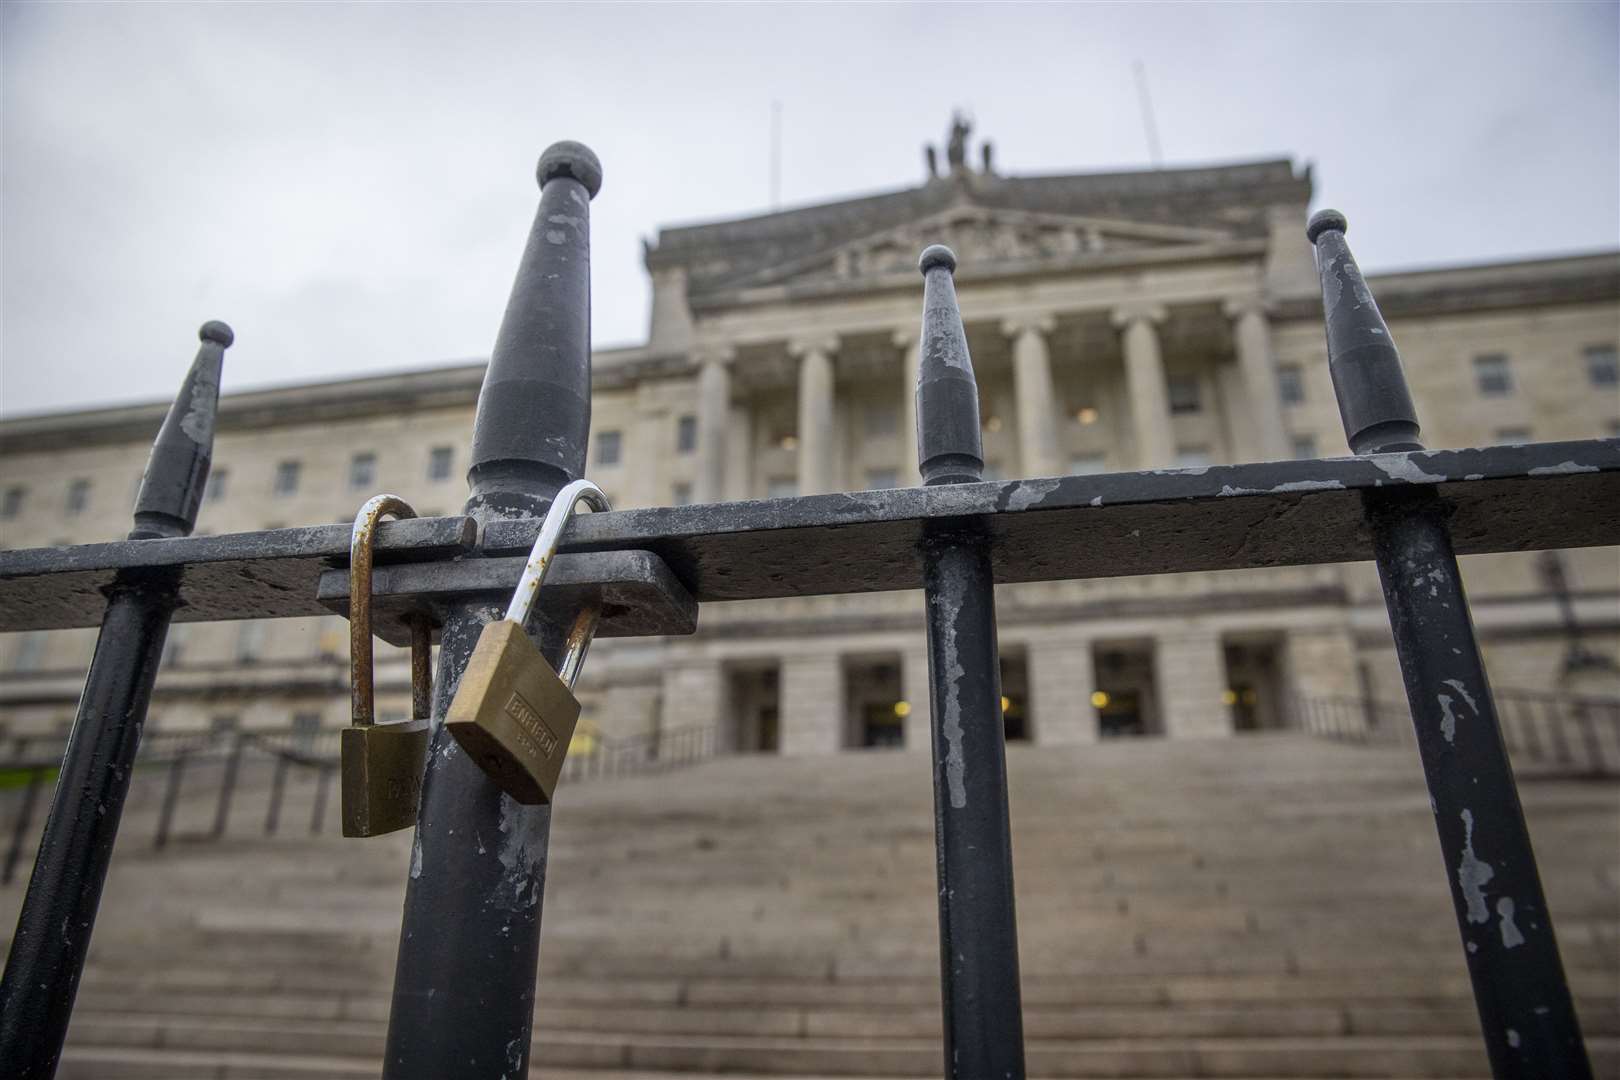 The DUP has been blocking powersharing at Stormont for more than a year (Liam McBurney/PA)